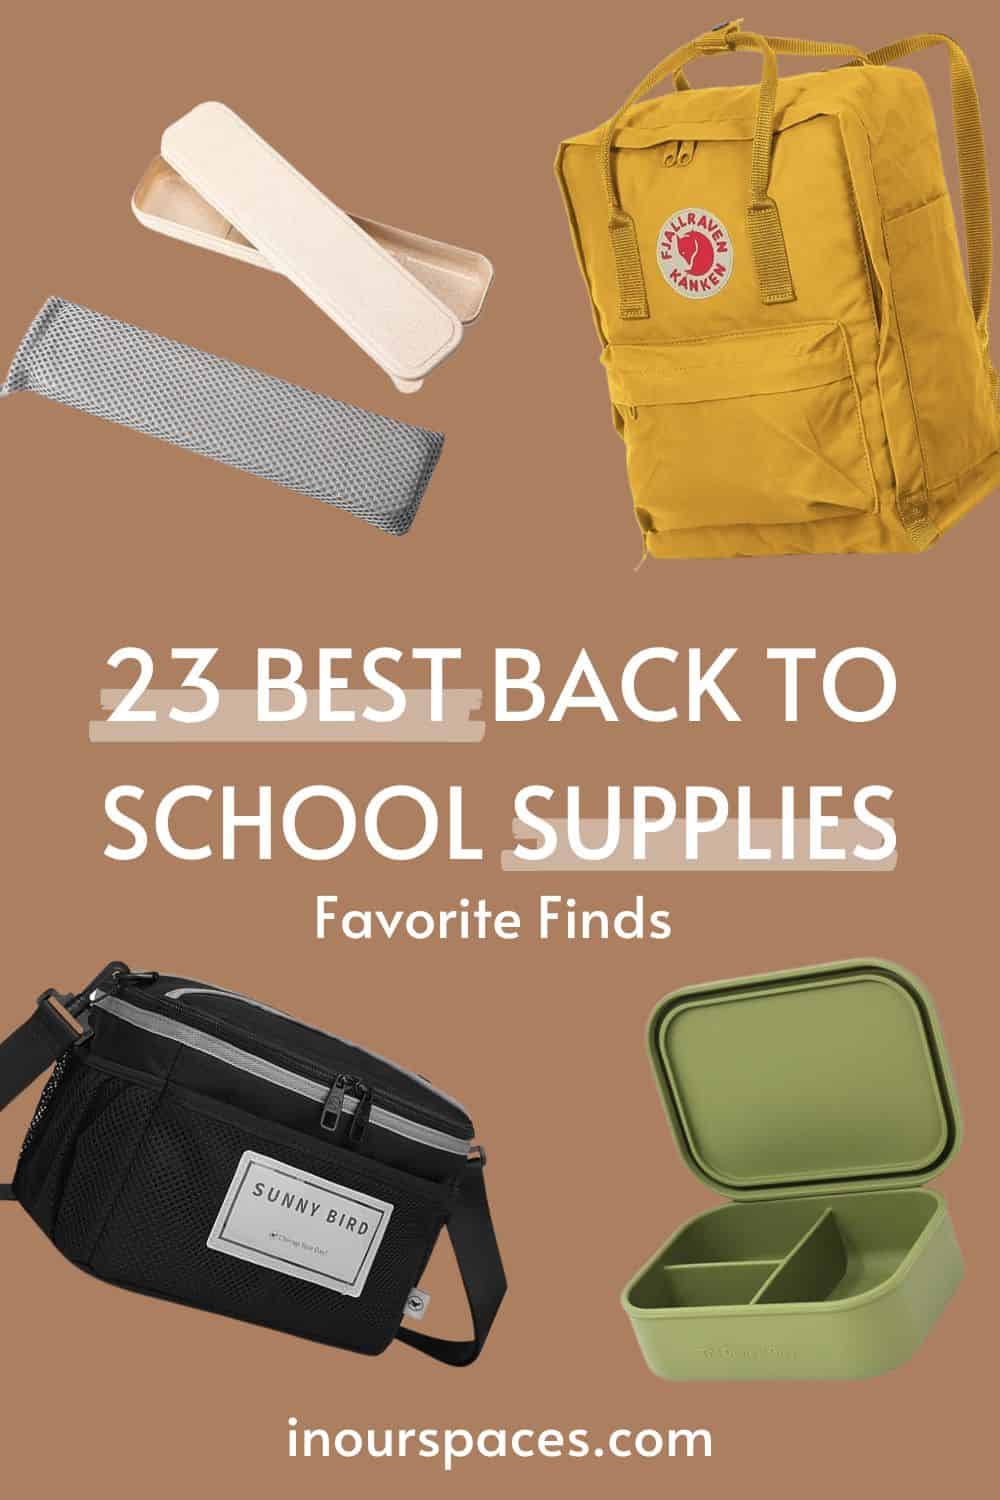 image of backpack, eating utensils case, lunch bag, and lunch box with text: 23 best back to school supplies - favorite finds - inourspaces.com